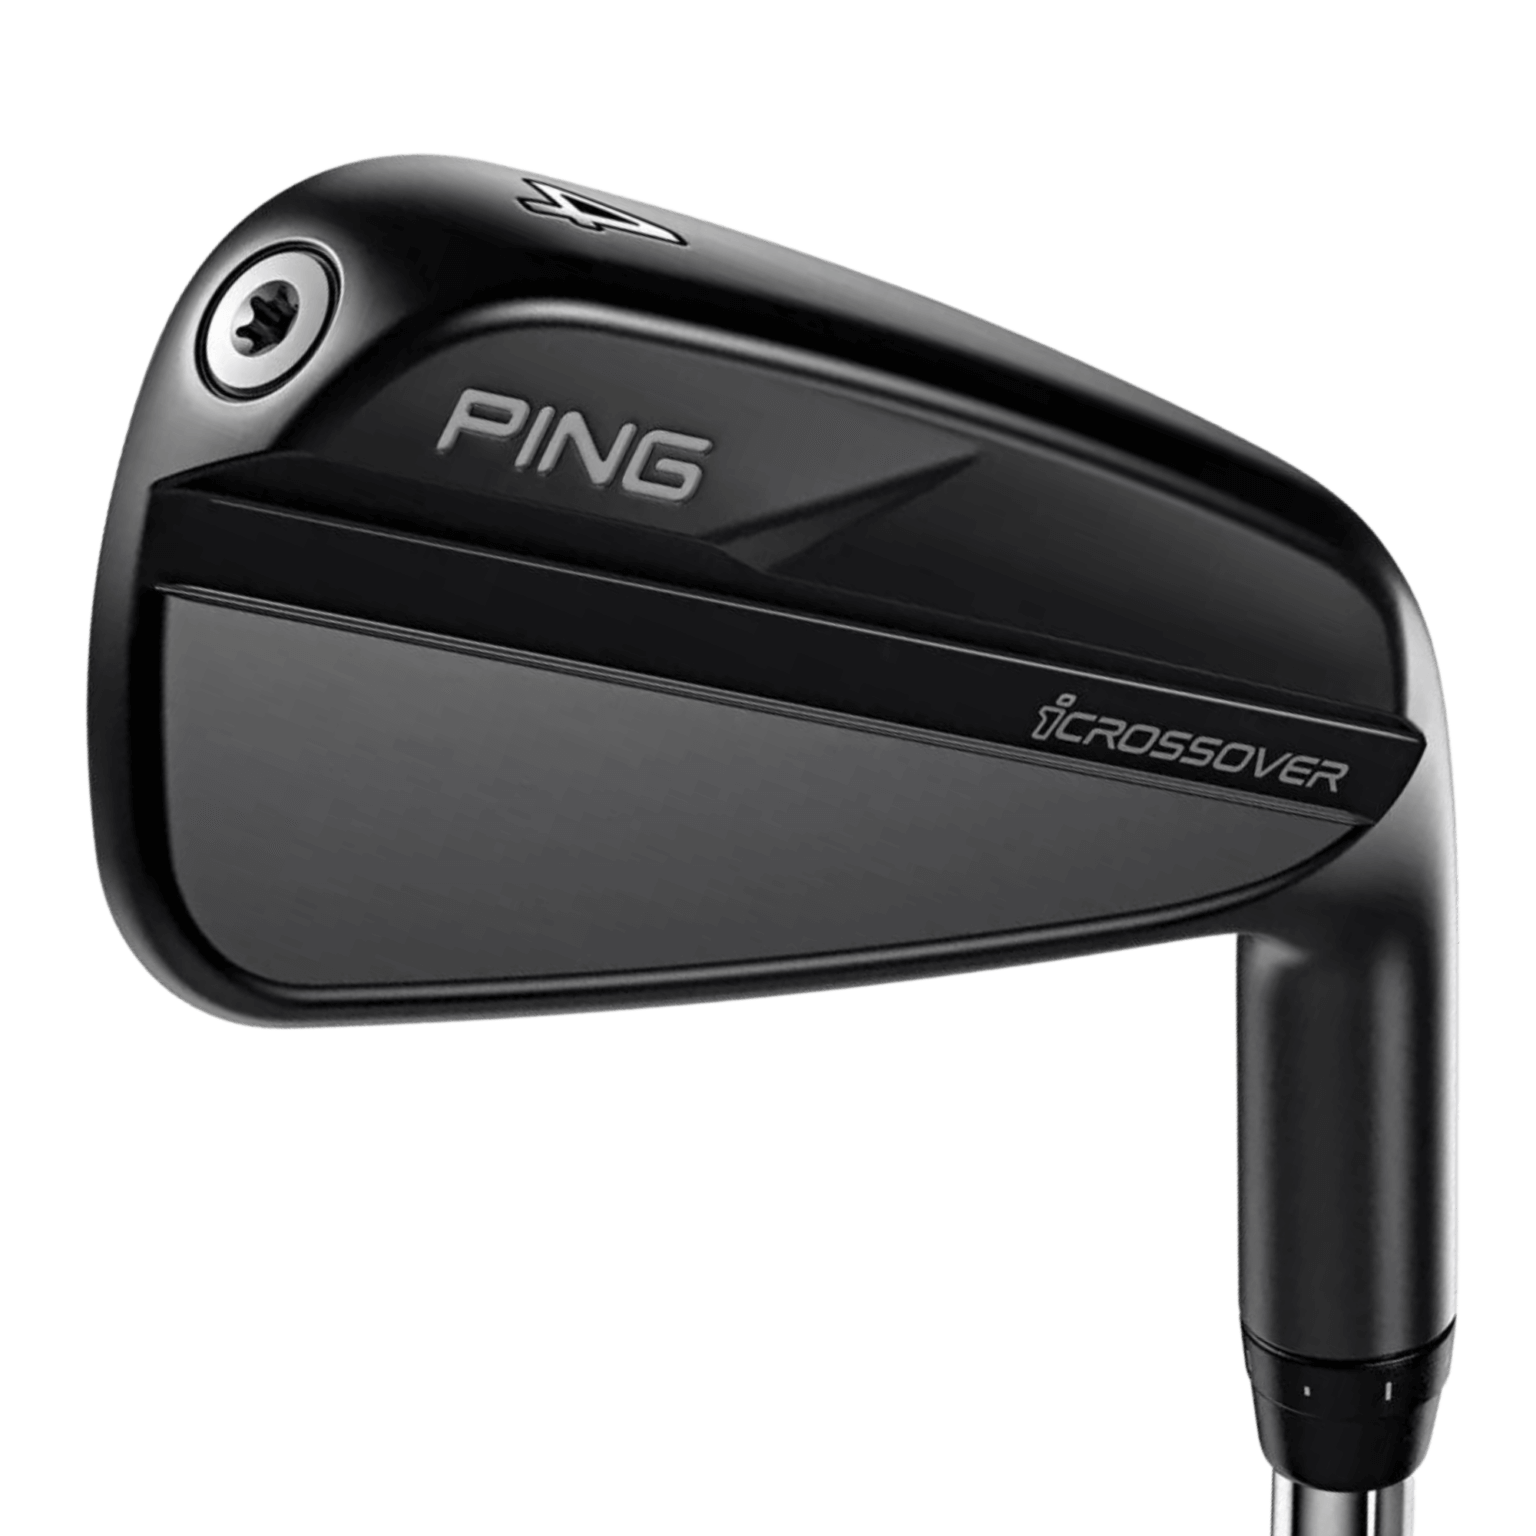 PING iCrossOver Utility Irons Review